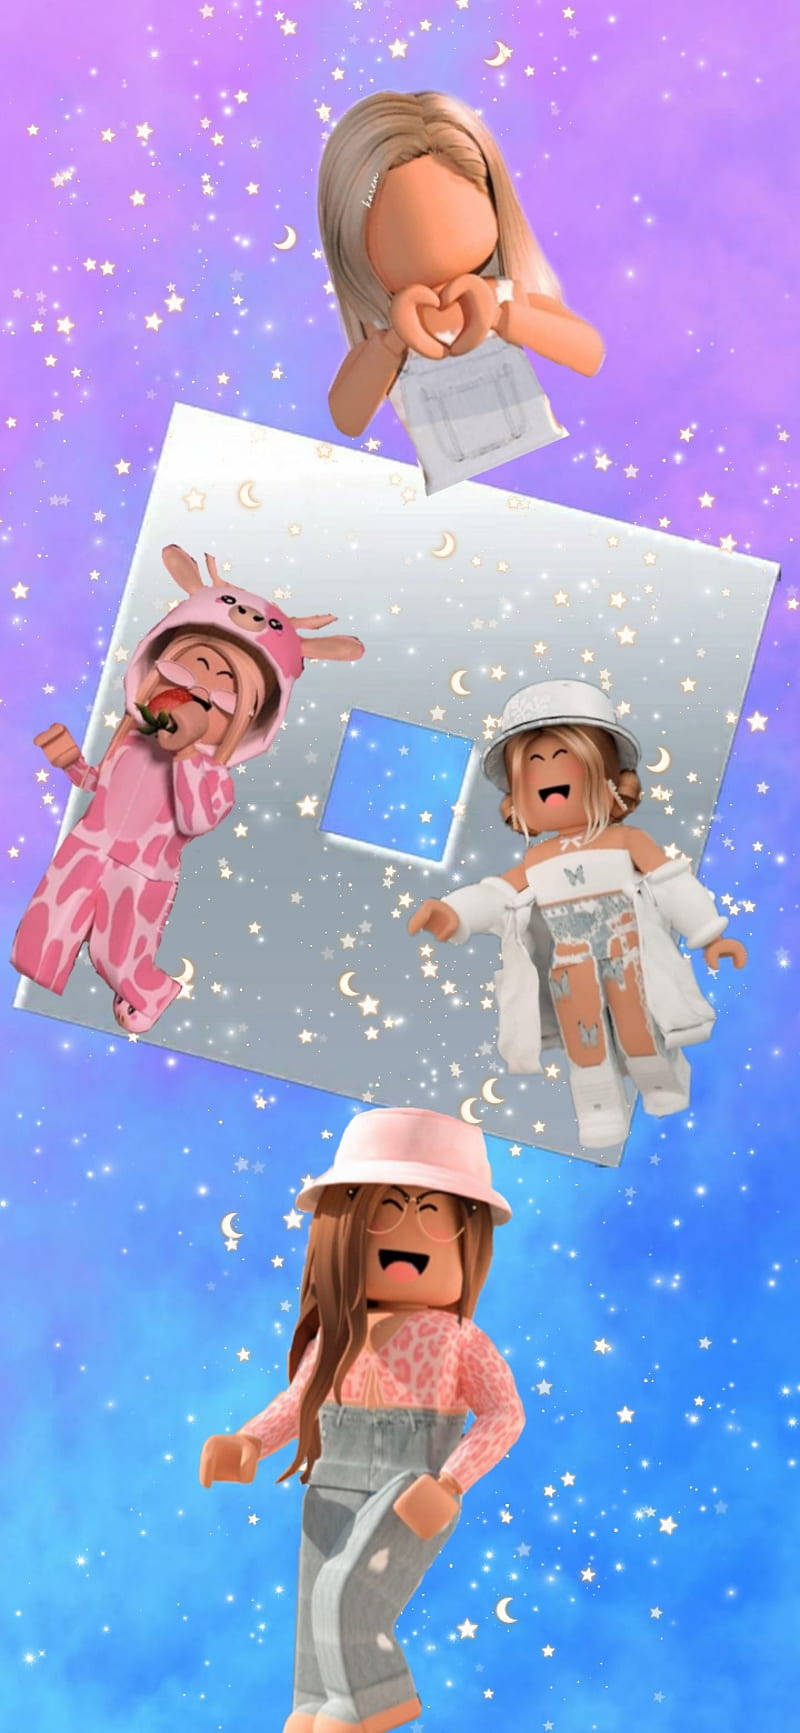 Aesthetic Roblox Girls Collage Wallpaper